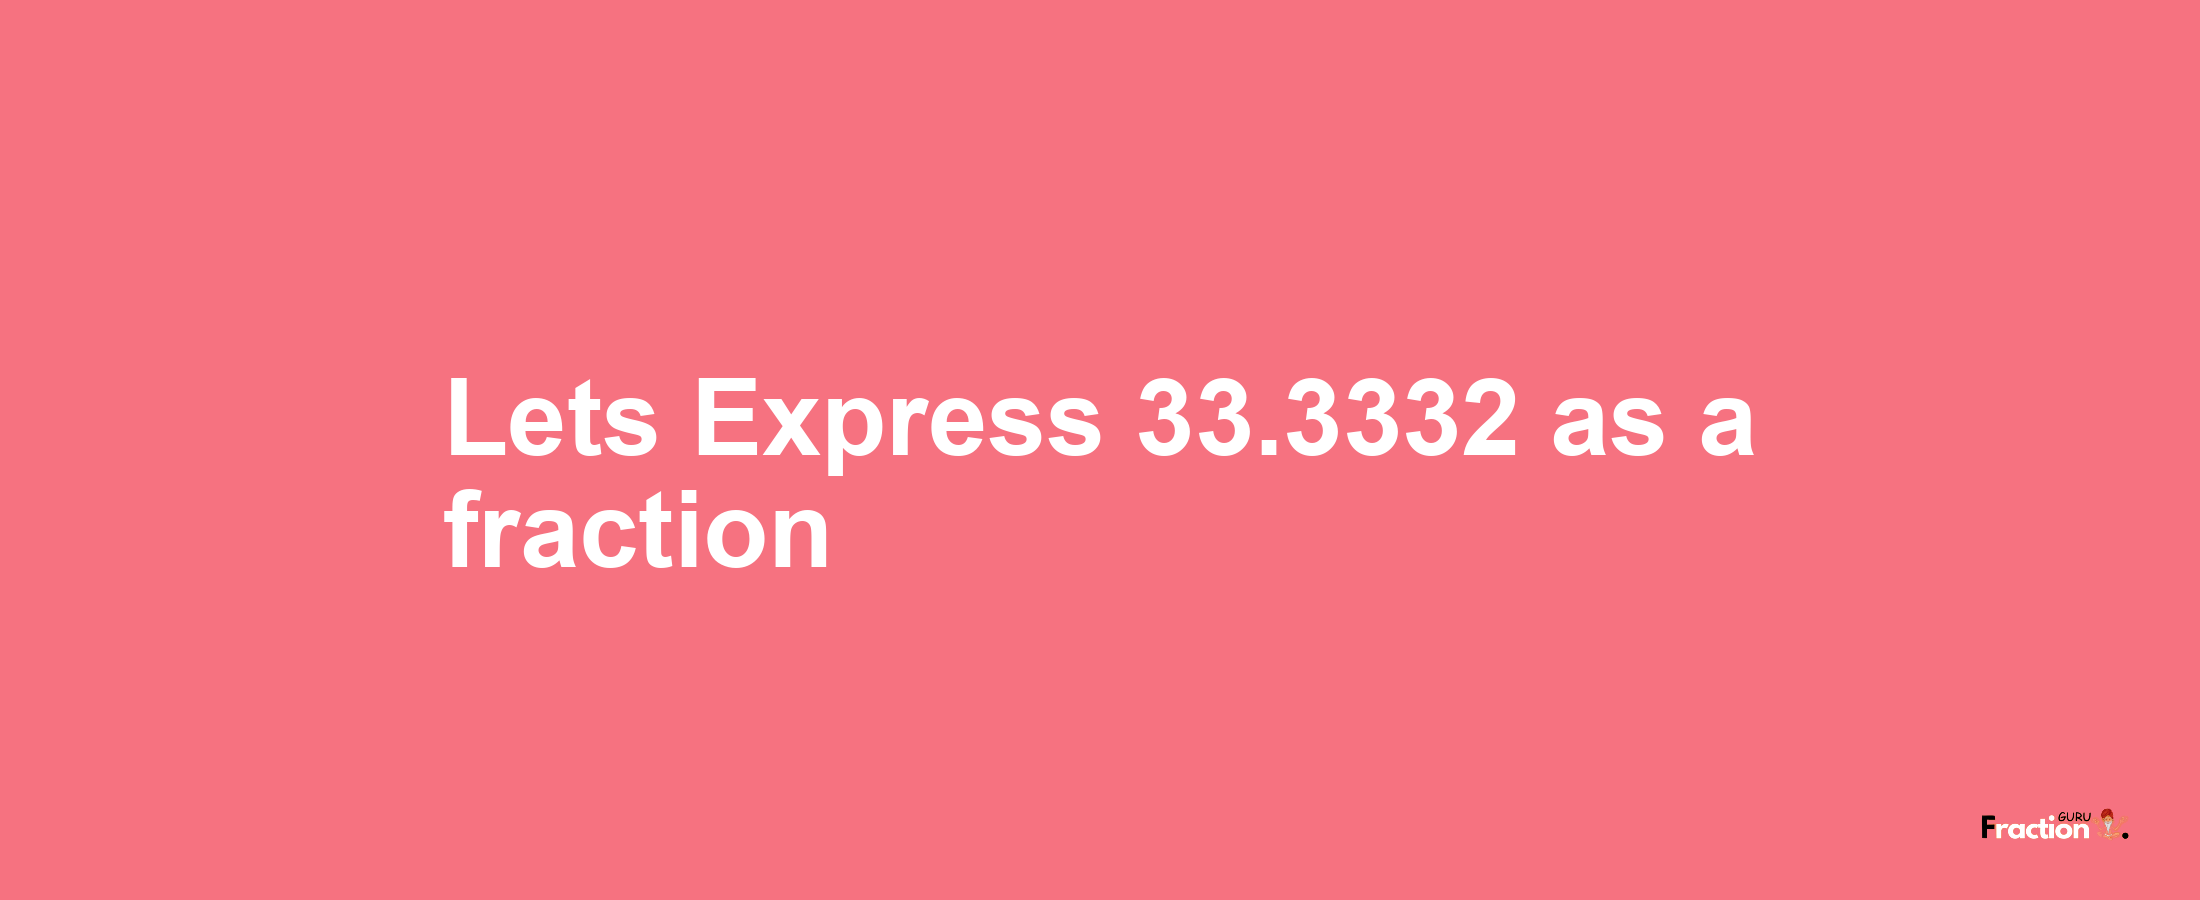 Lets Express 33.3332 as afraction